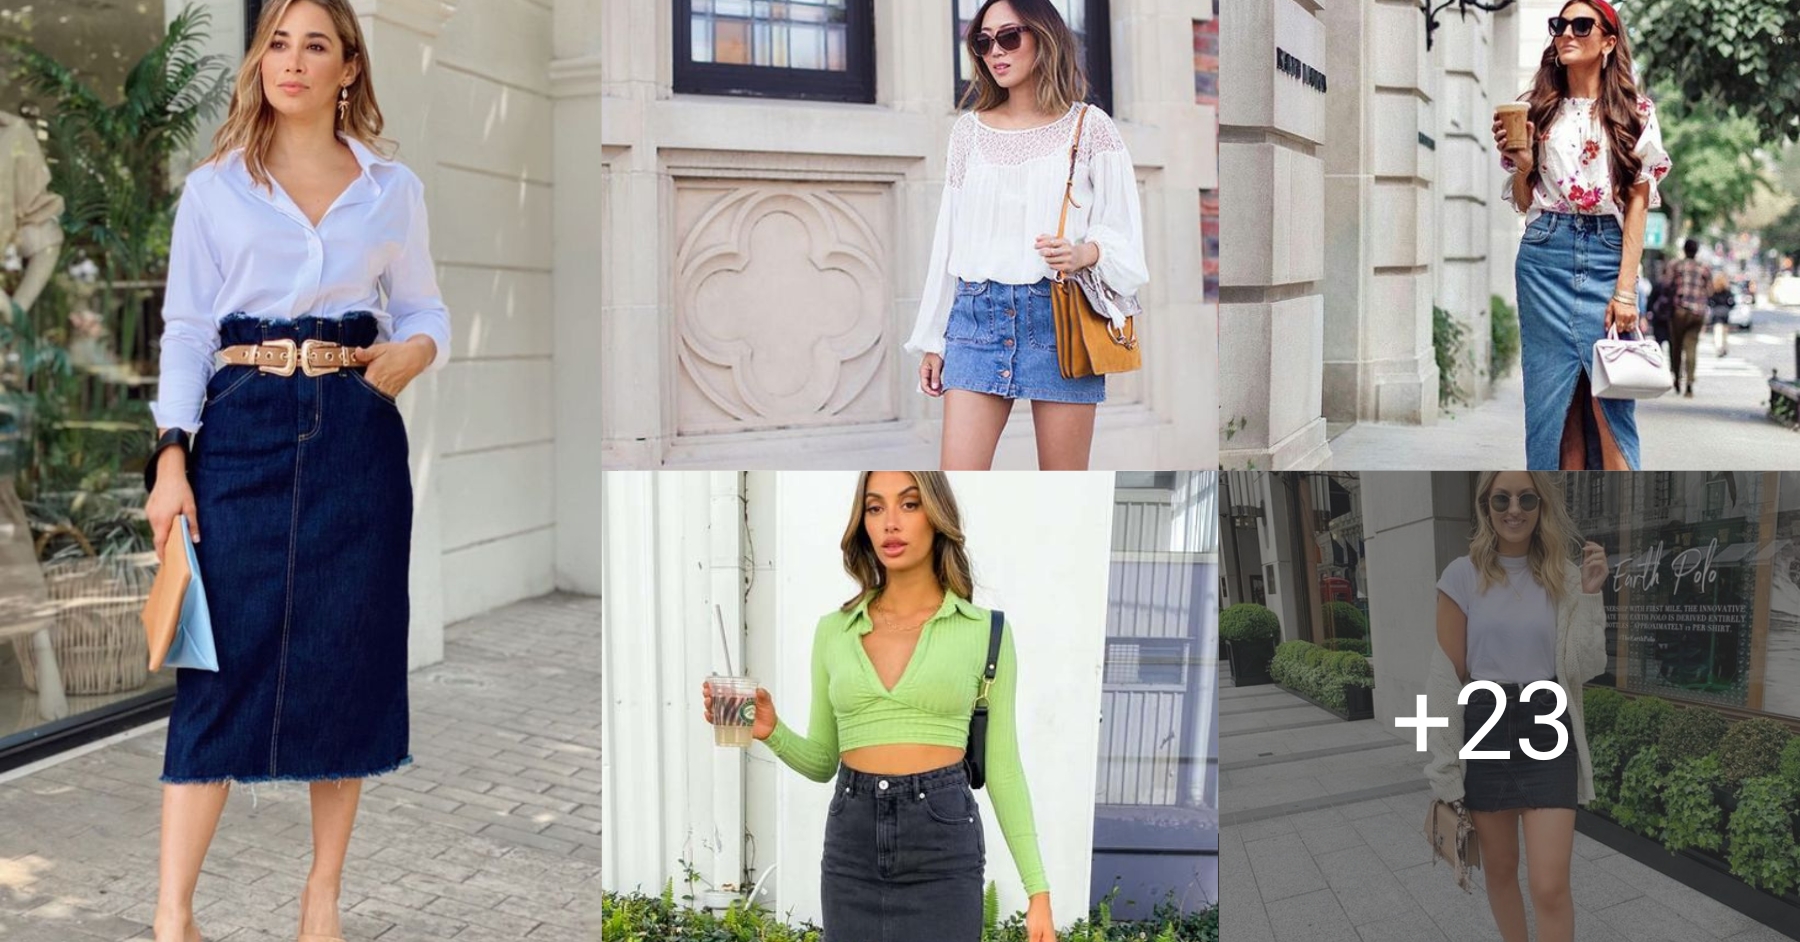 Outfits con falda jeans